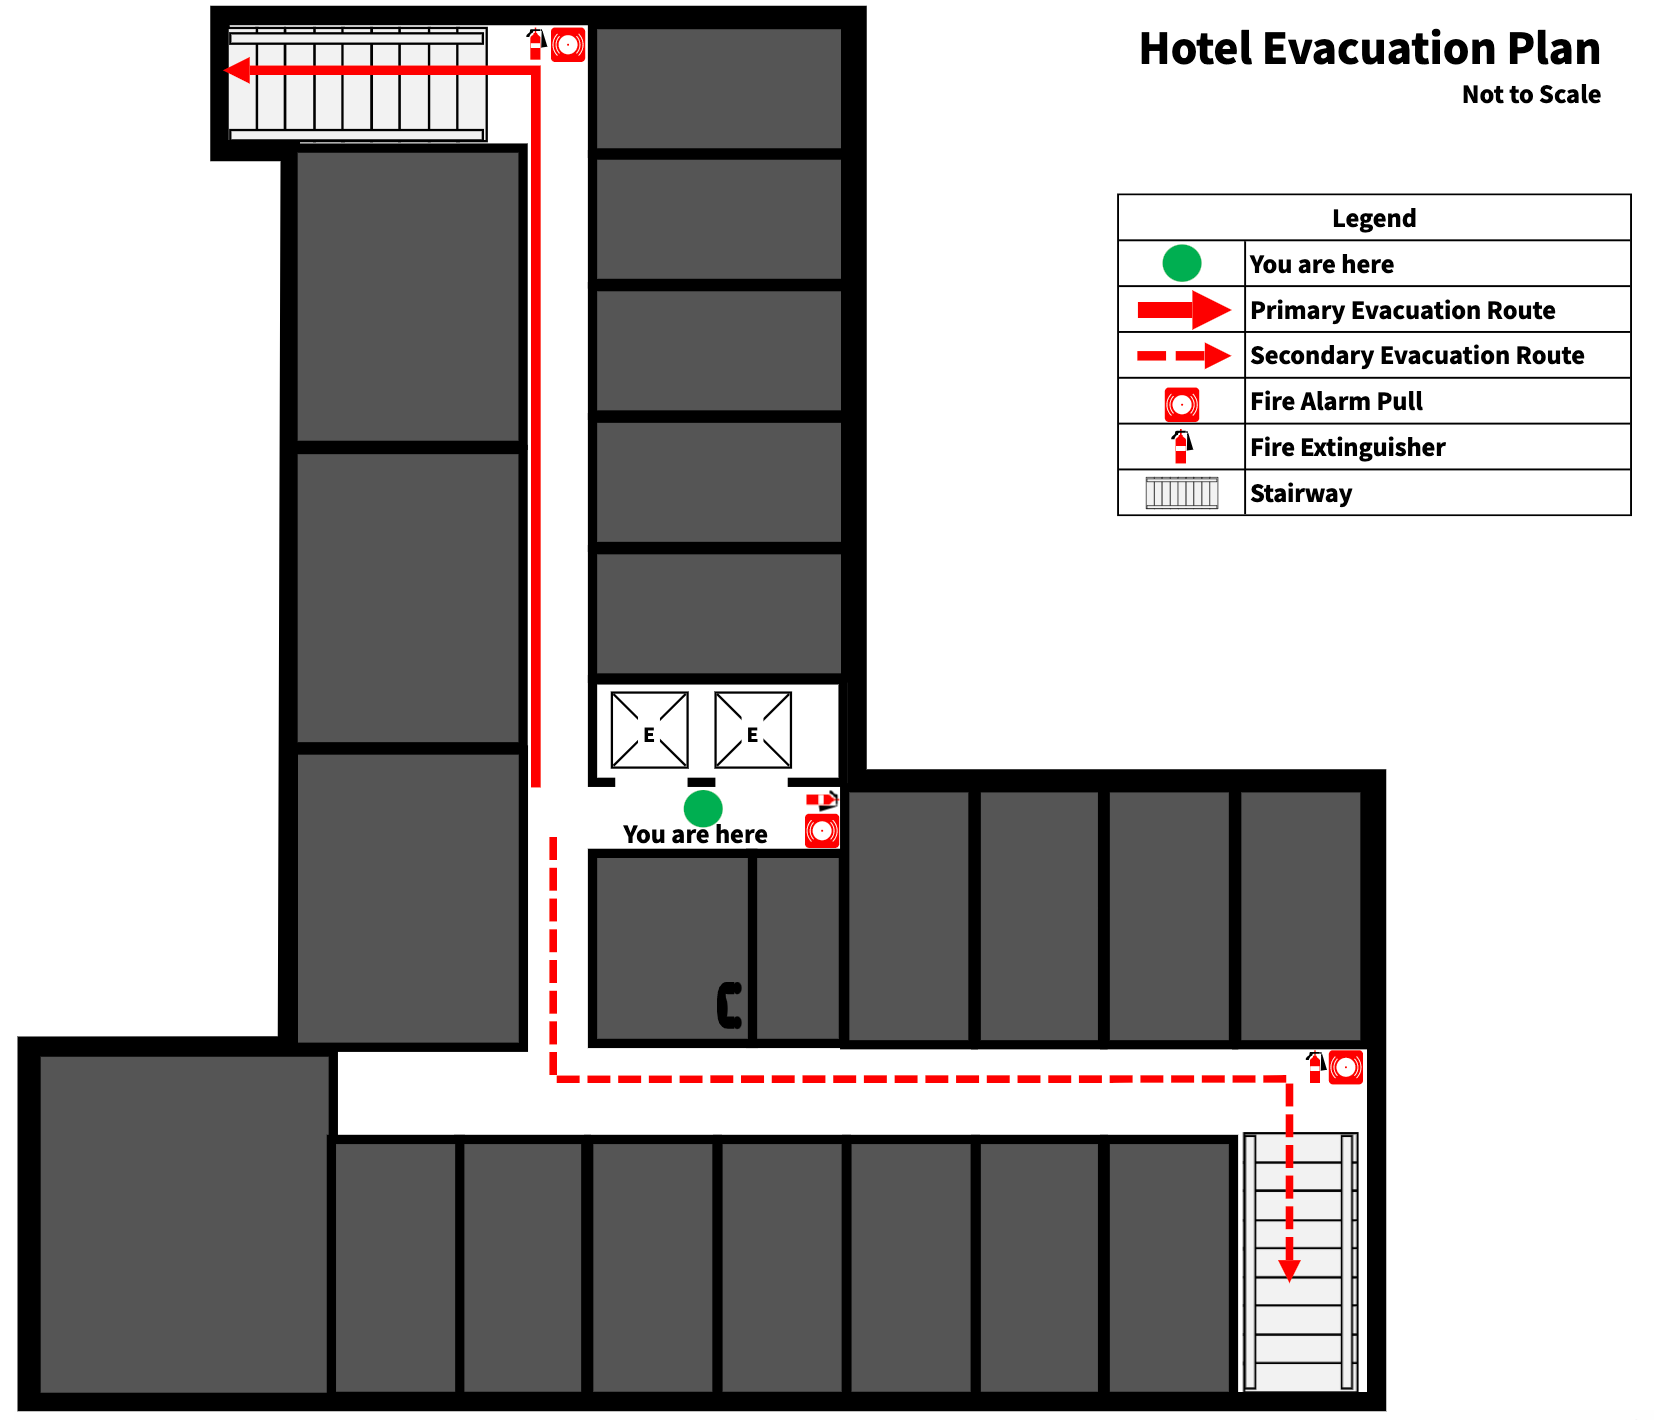 An example evacuation plan for a hotel interior.